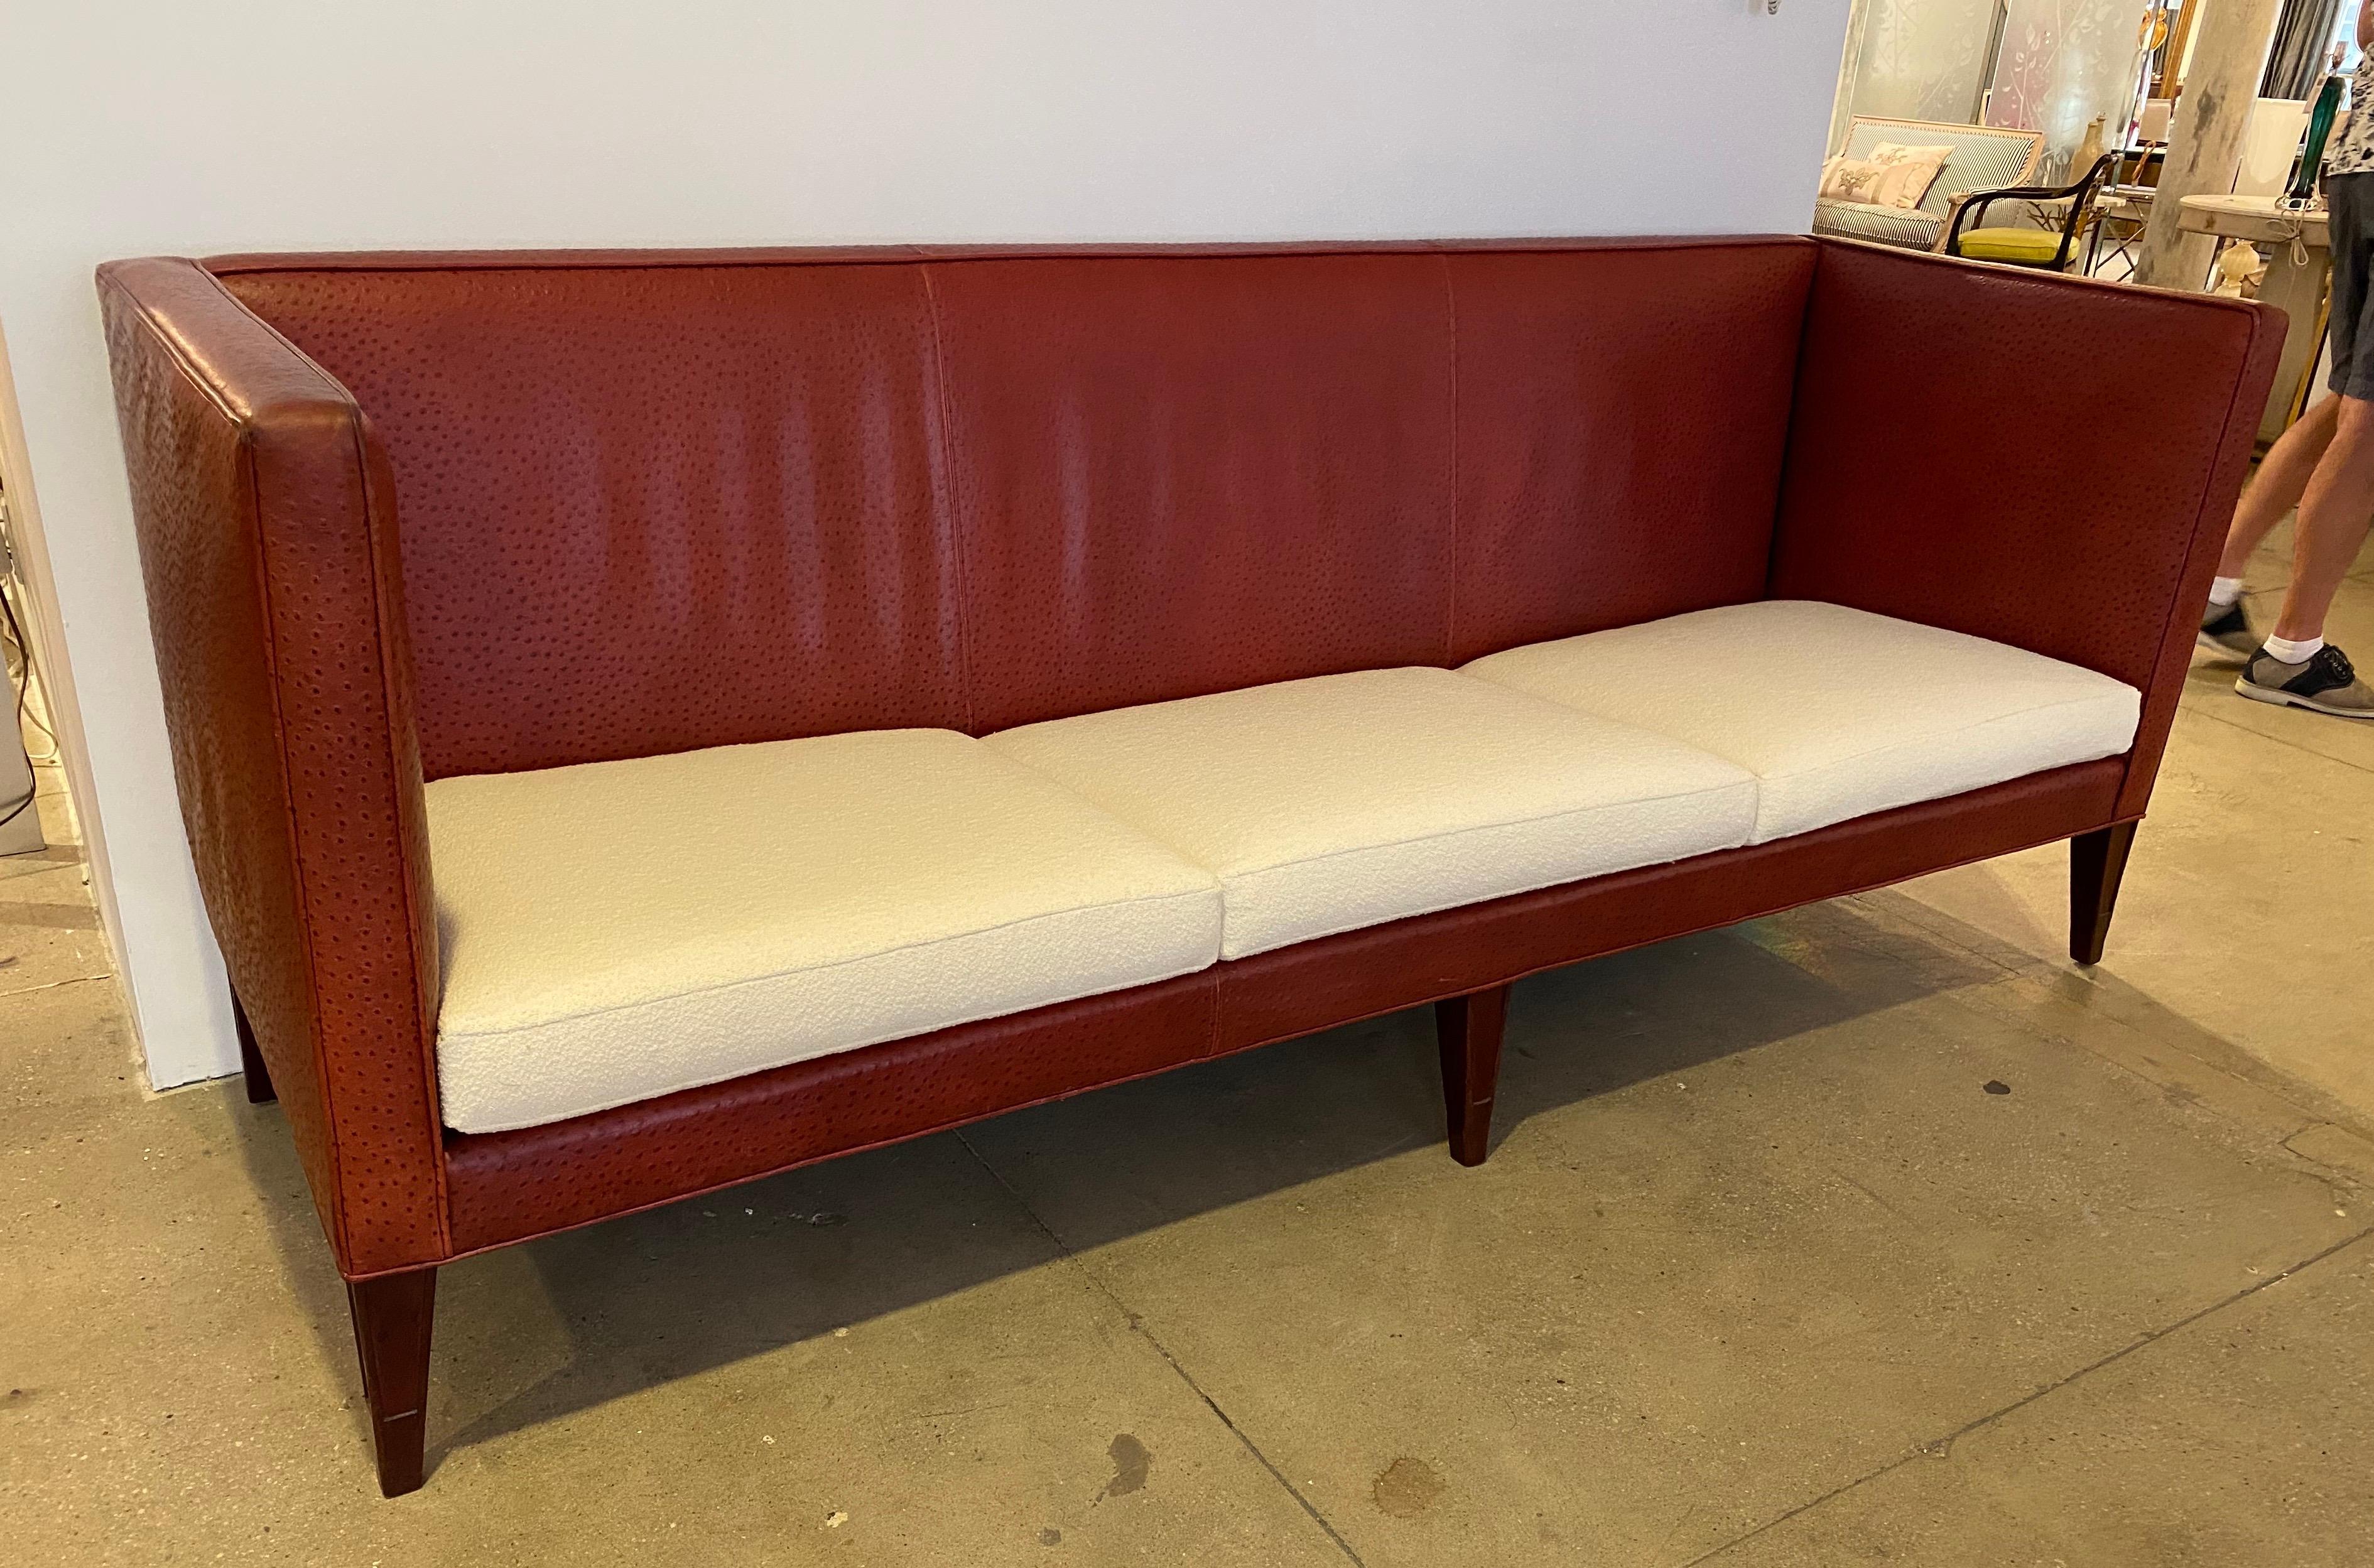 Philippe Starck Redwood Room Clift Hotel Leather Sofa 7